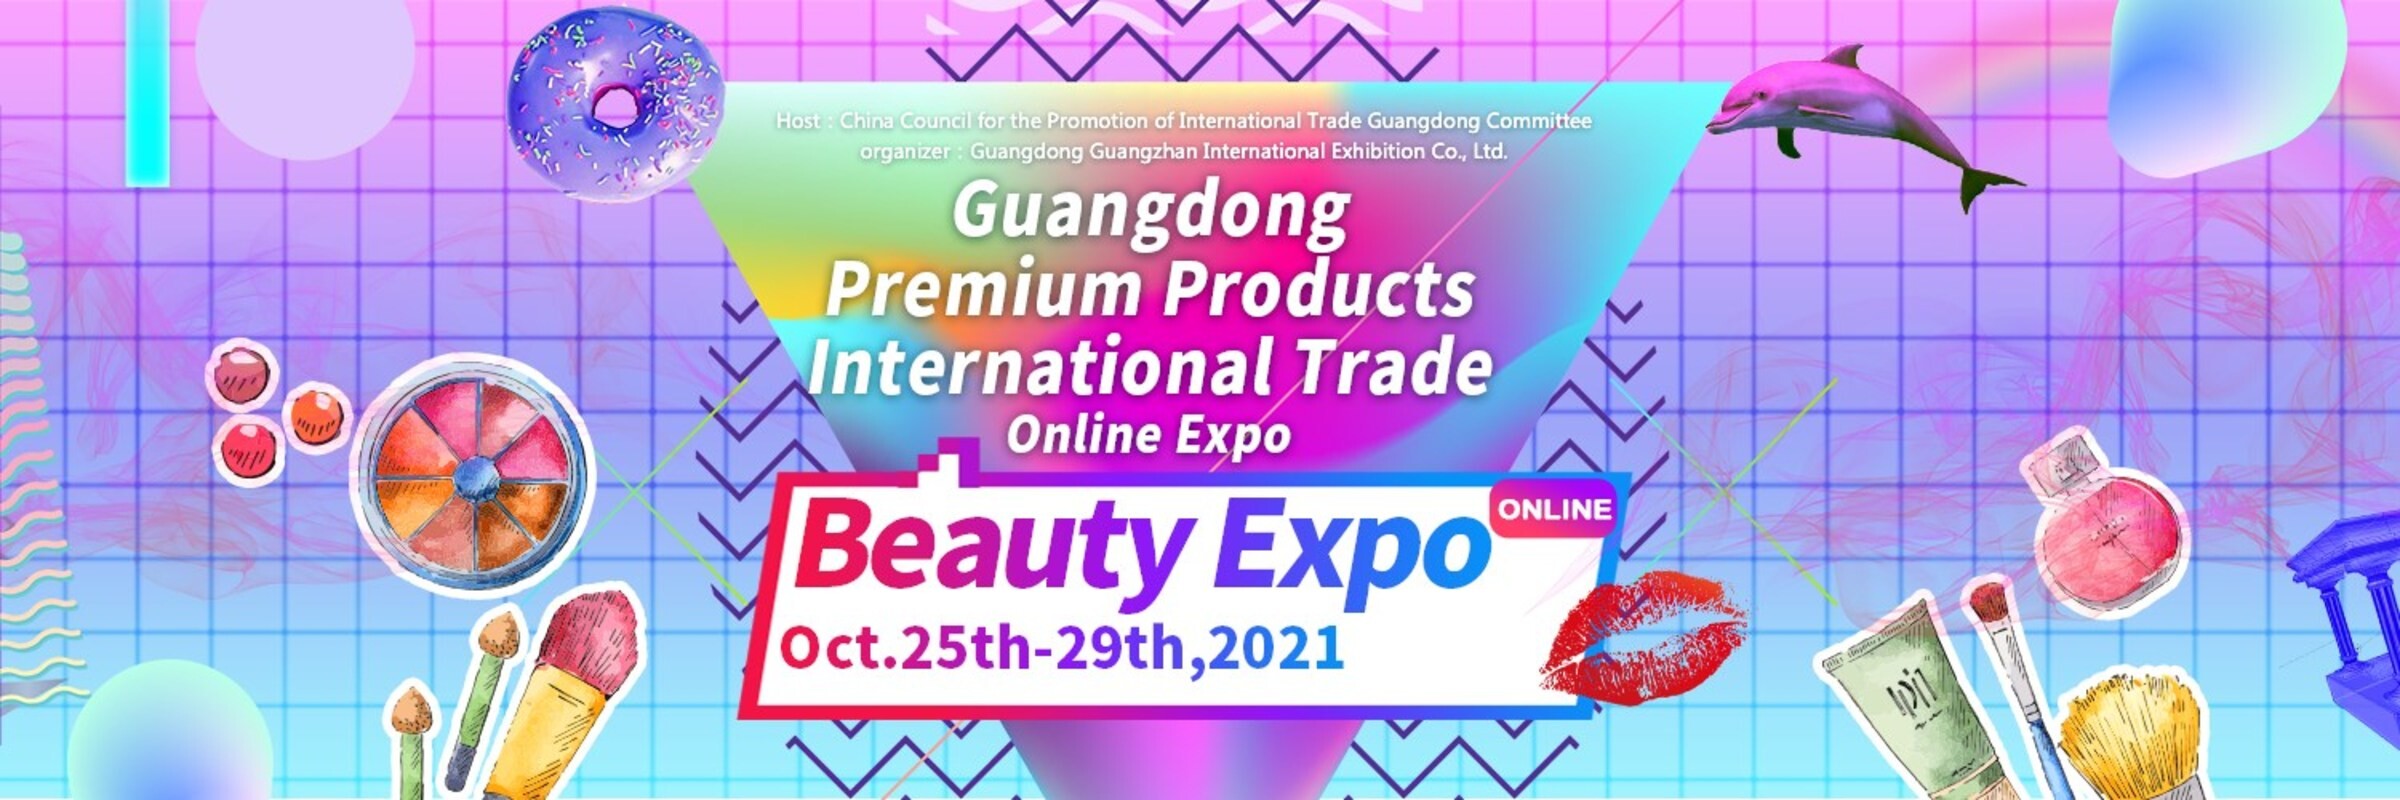 Guangdong Premium Products International Trade Online Expo - Beauty Expo kicks off on October 25